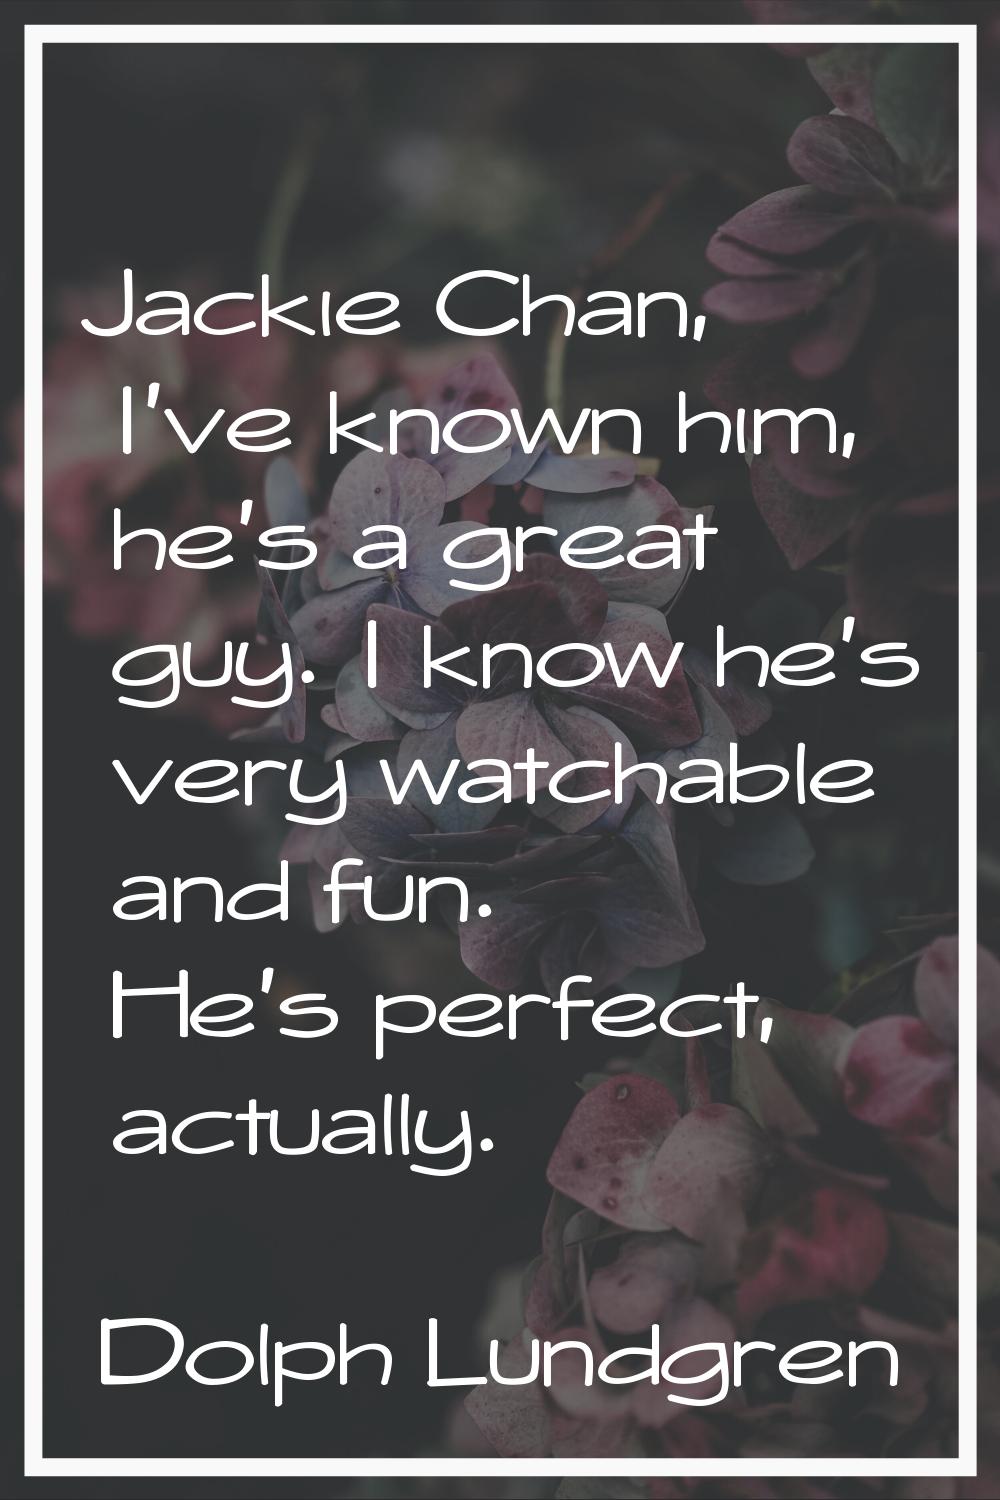 Jackie Chan, I've known him, he's a great guy. I know he's very watchable and fun. He's perfect, ac